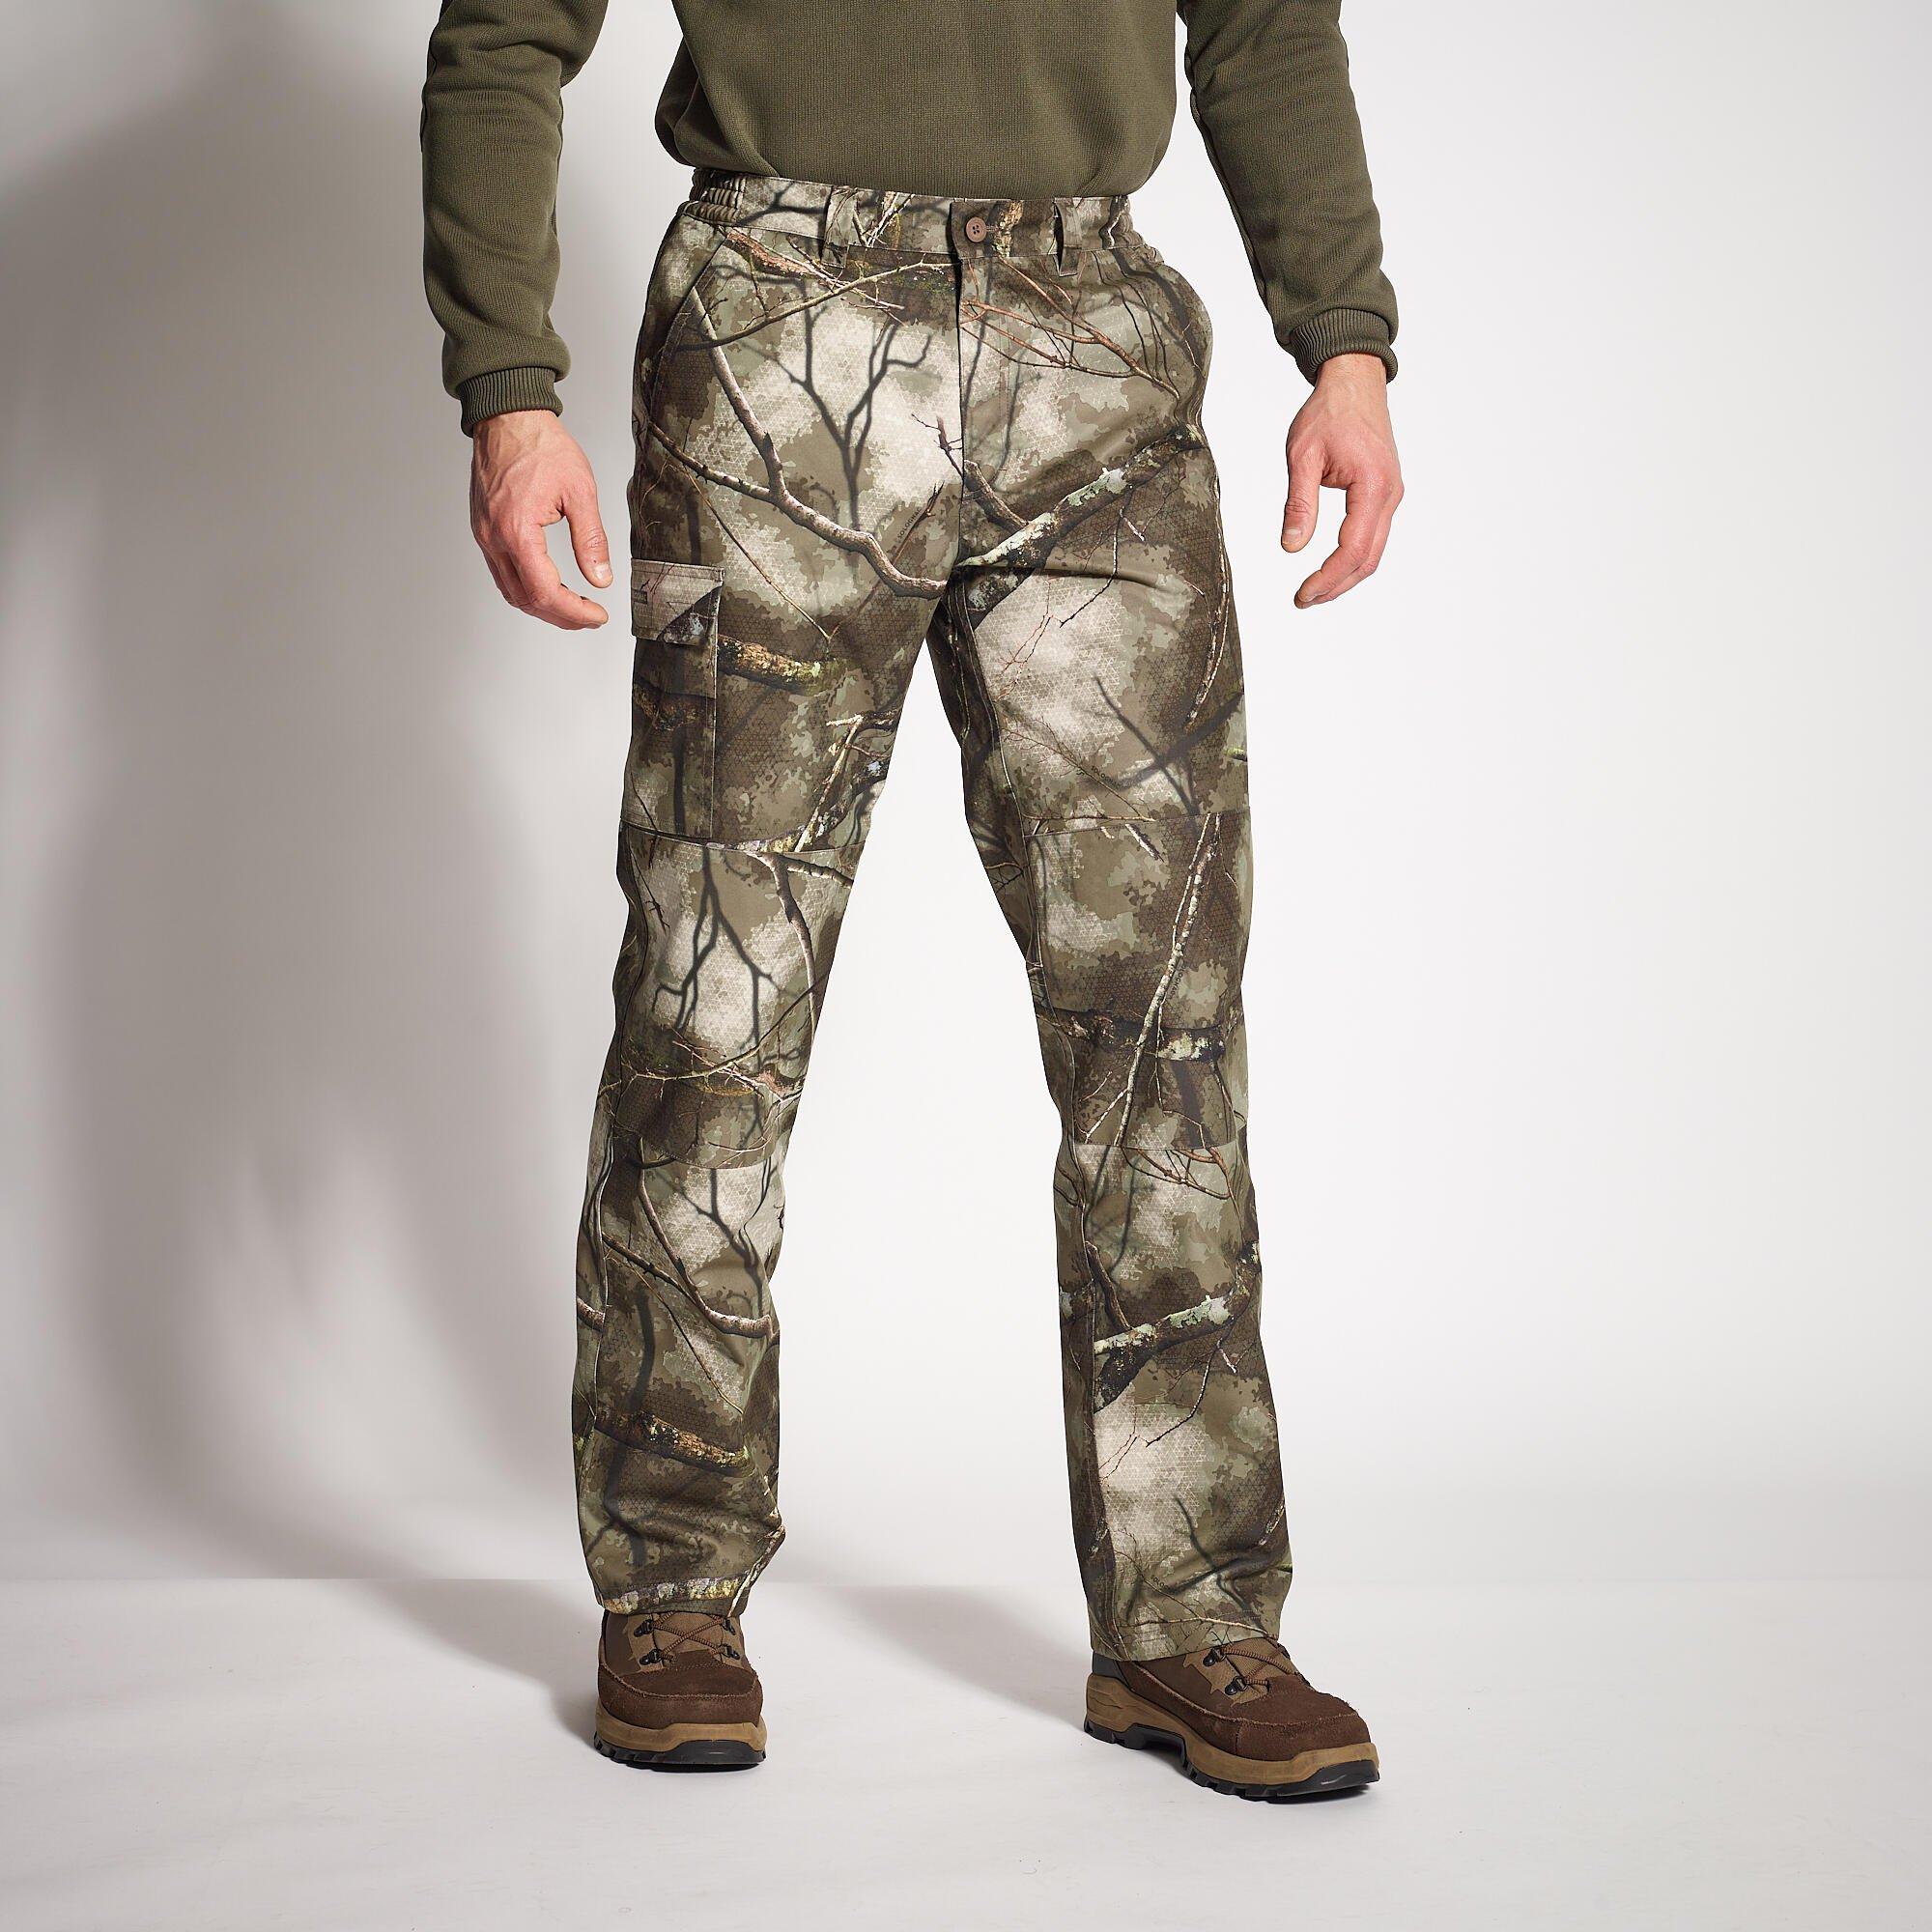 Trousers | Decathlon Durable Camouflage Trousers | Solognac